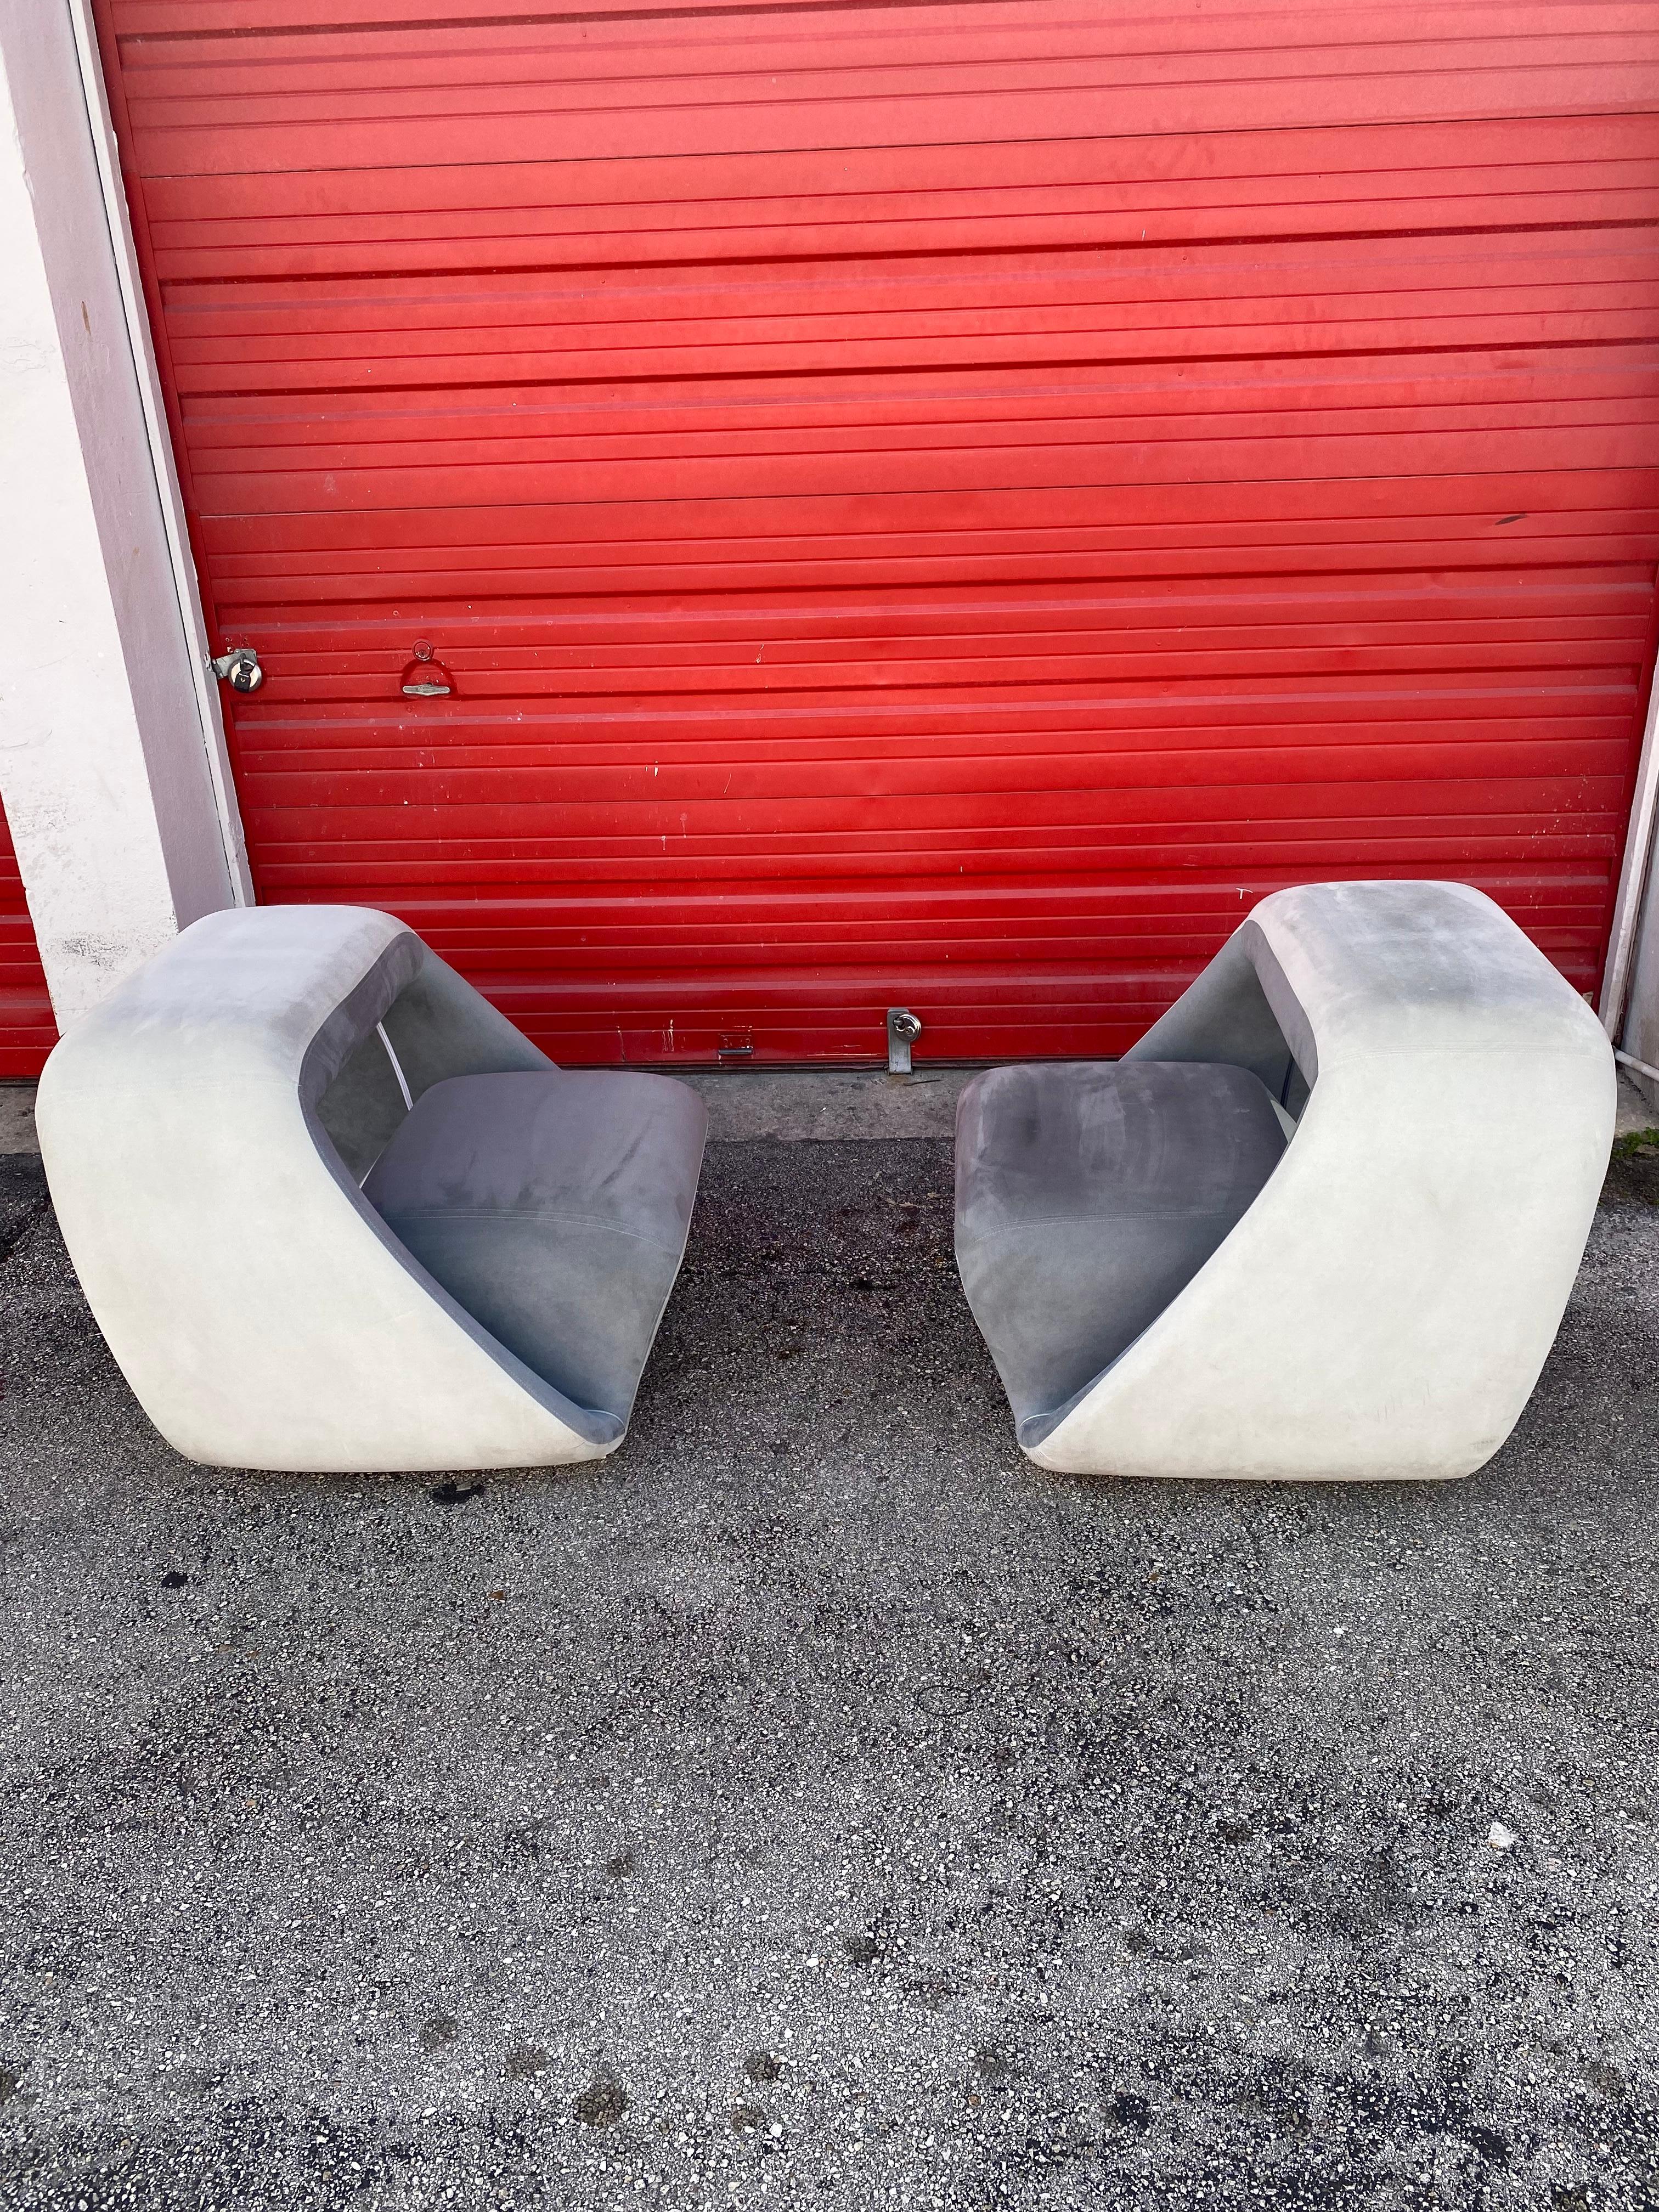 Late 20th Century 1970s Meritalia Sculptural Space Age Air Loungers Chairs, Set of 2 For Sale